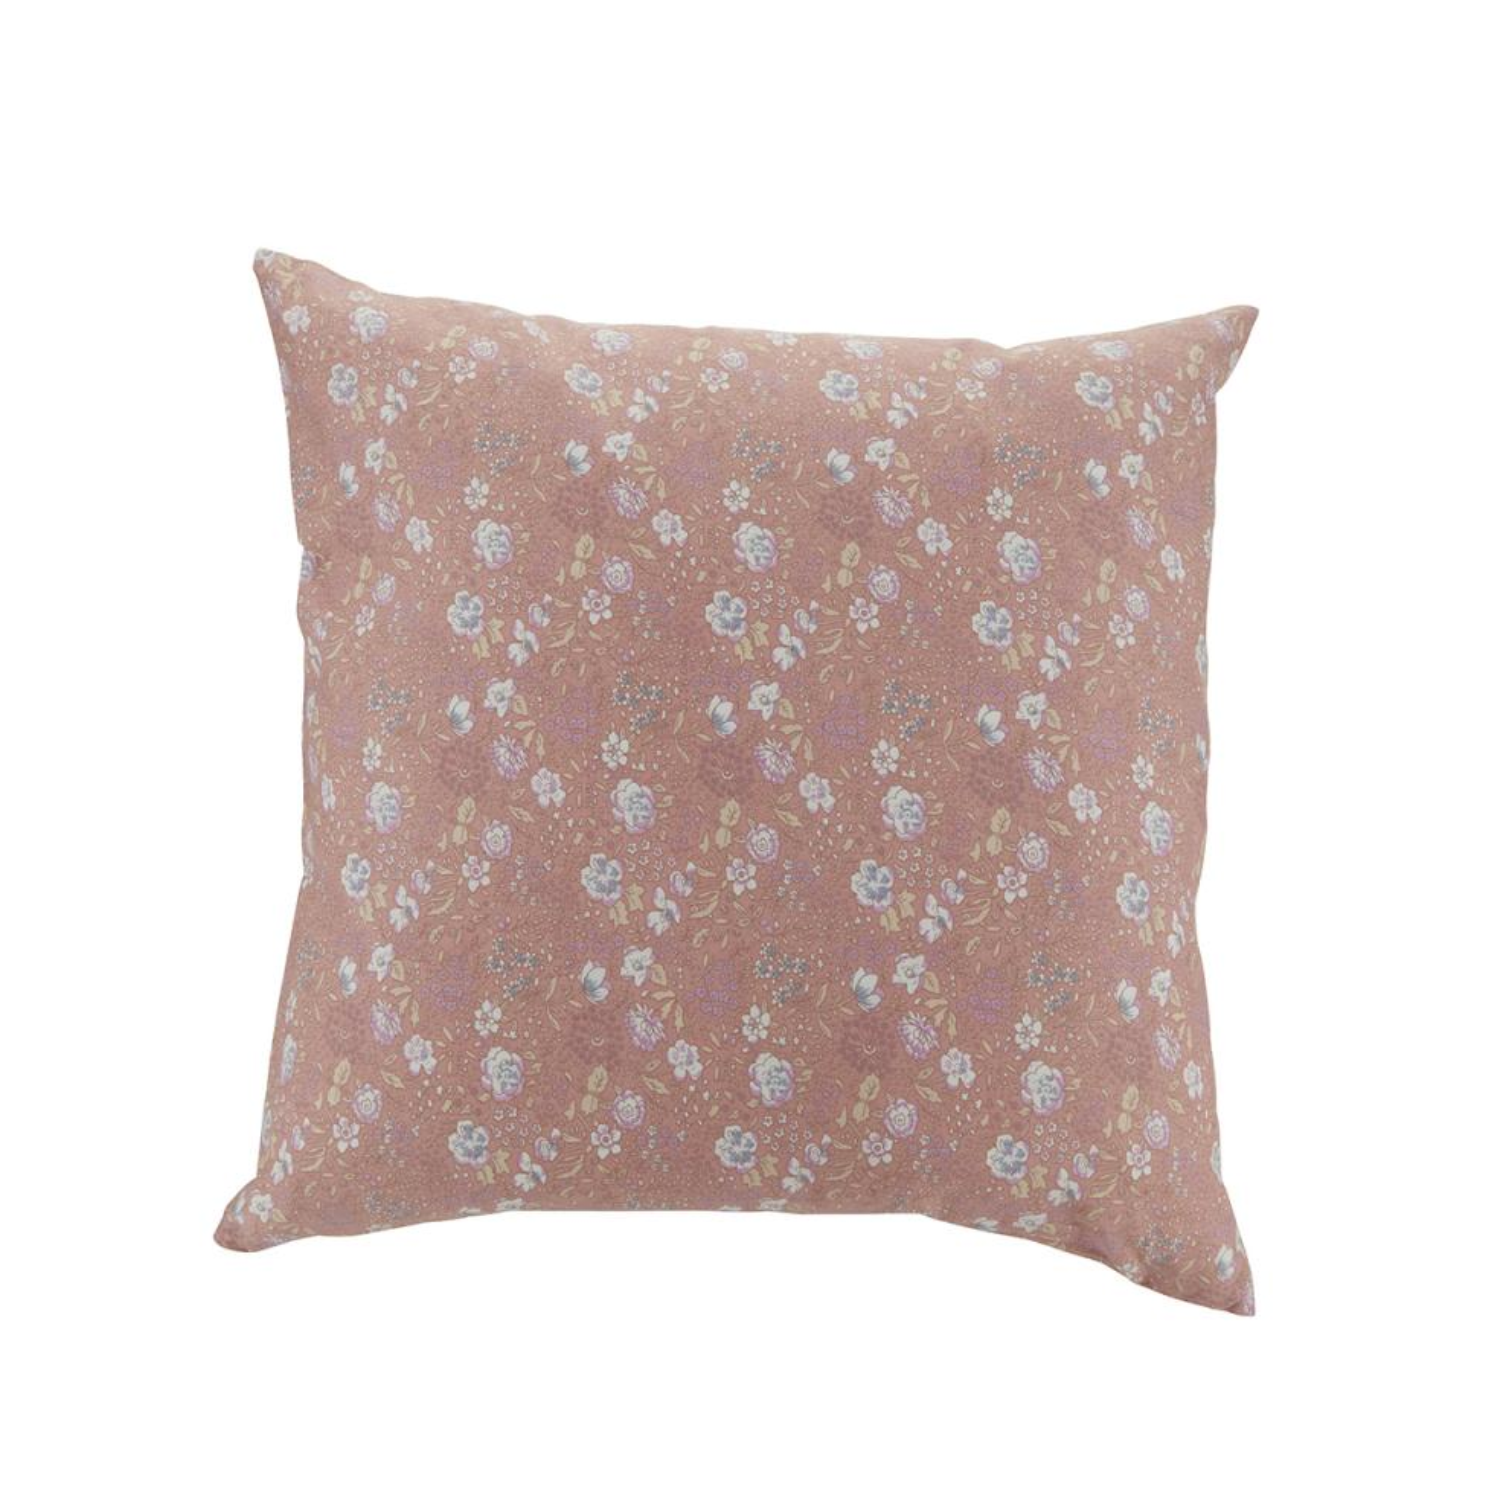 Made by moi Selection Coussin fleuri rose